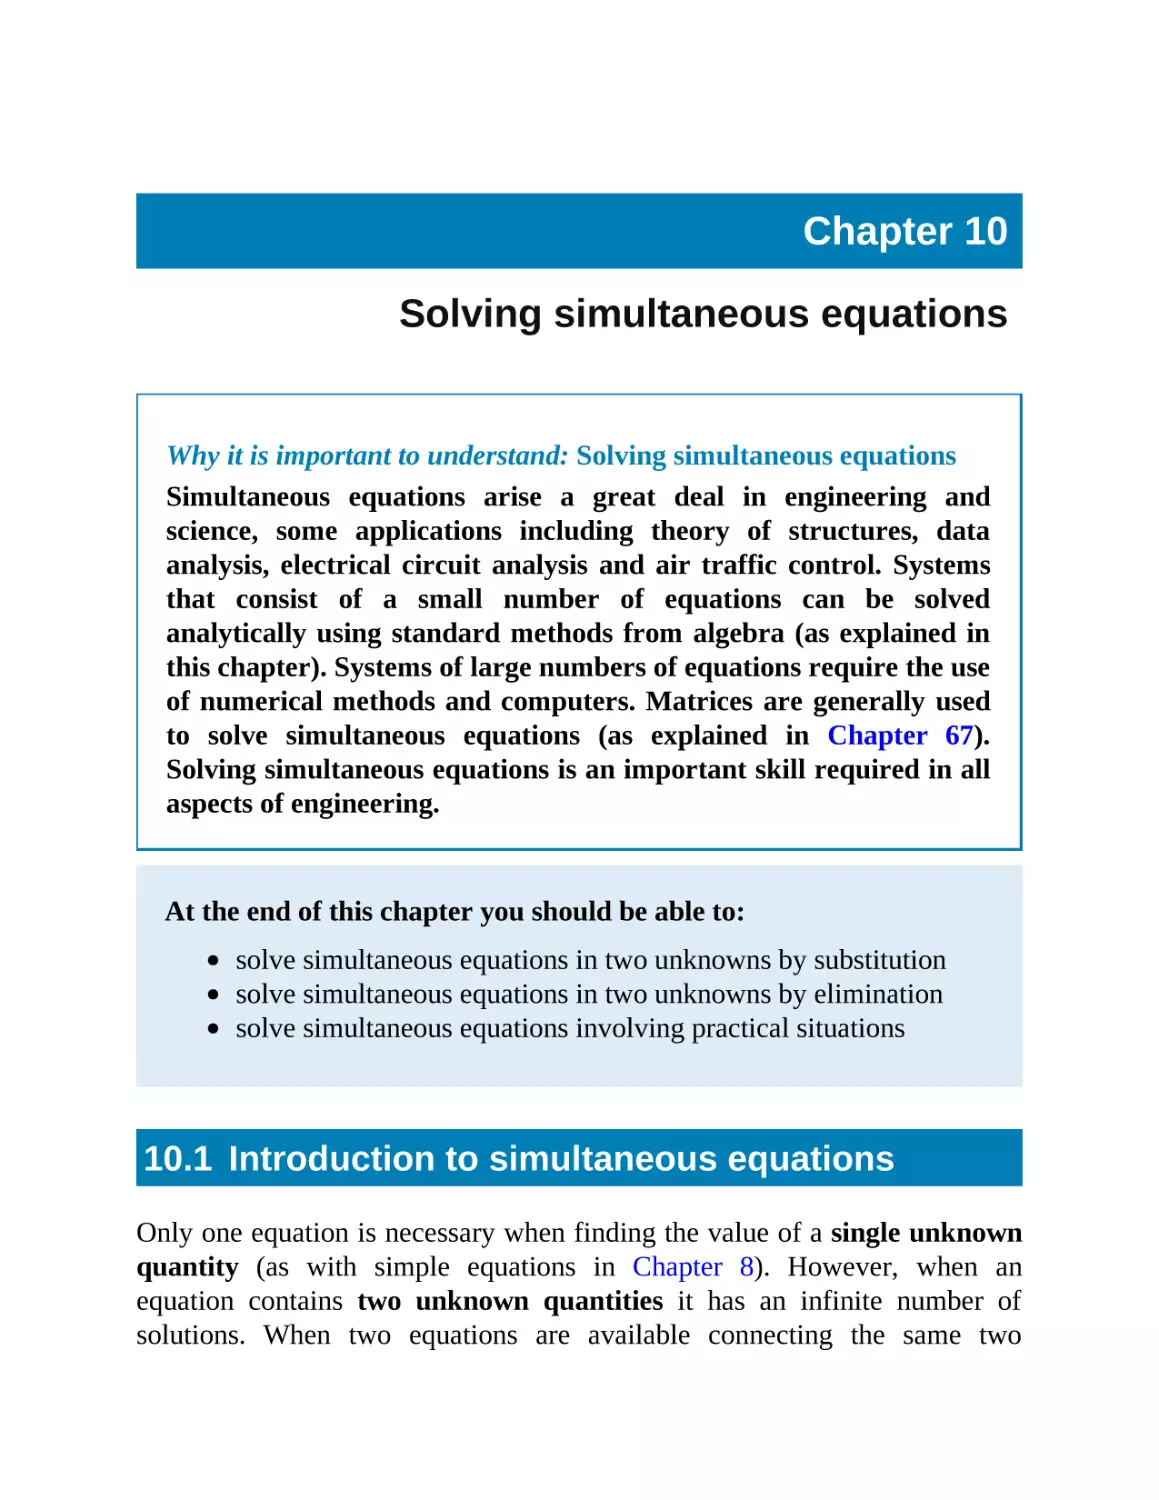 10 Solving simultaneous equations
10.1 Introduction to simultaneous equations